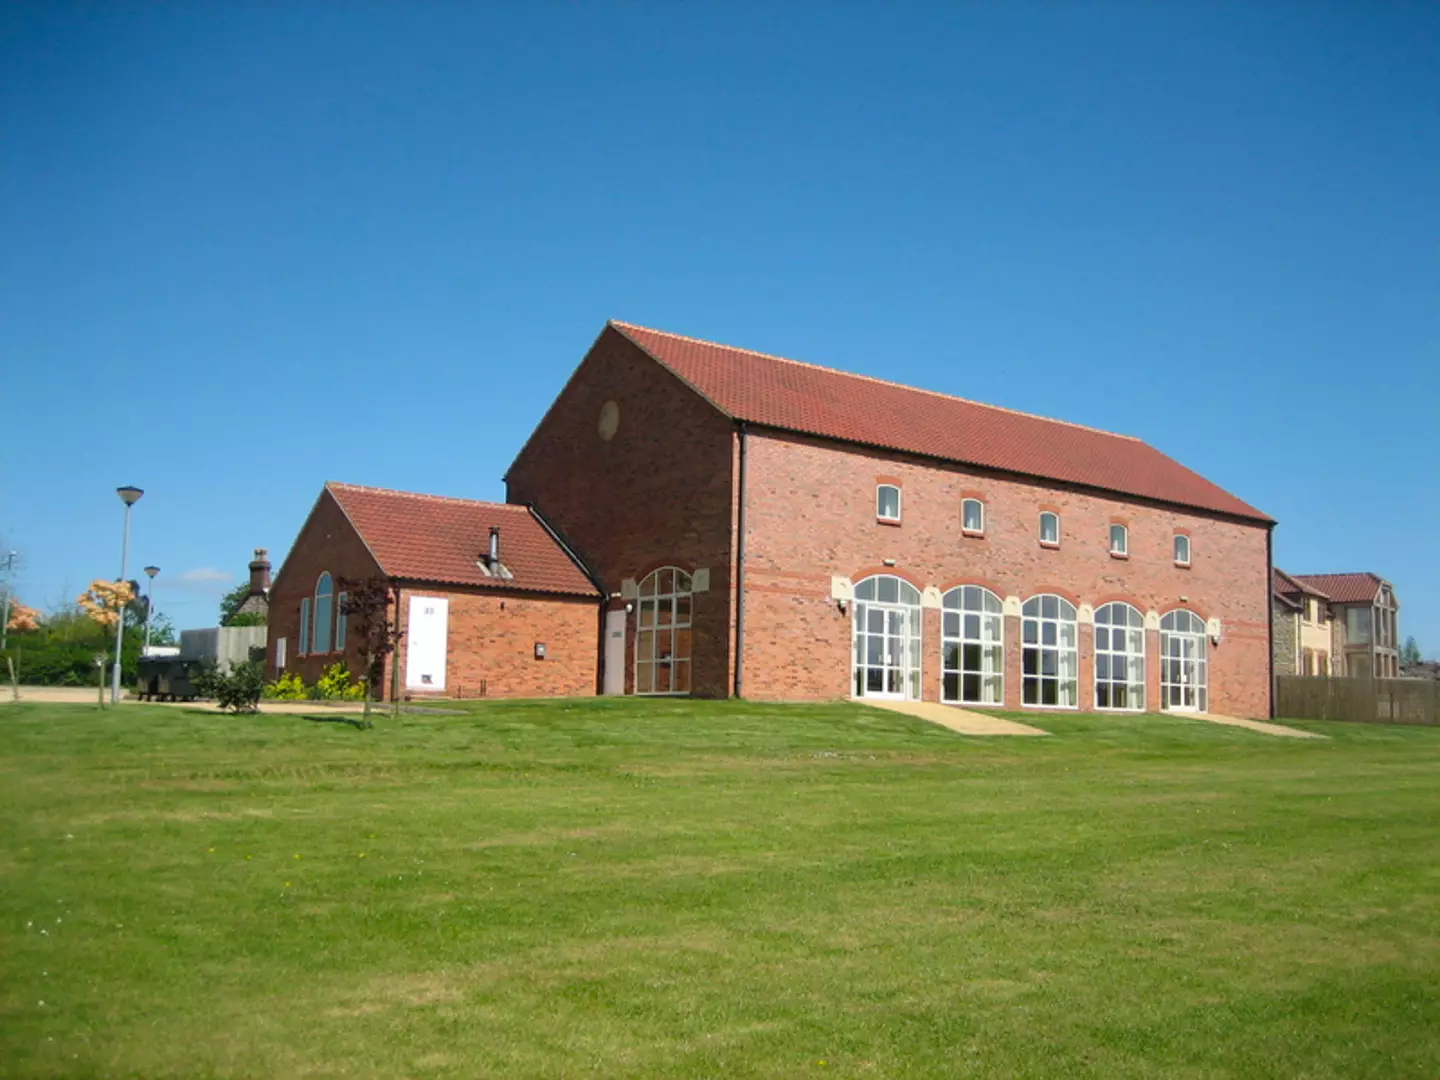 Waltham on the Wolds is used for weddings and Scout group meetings.